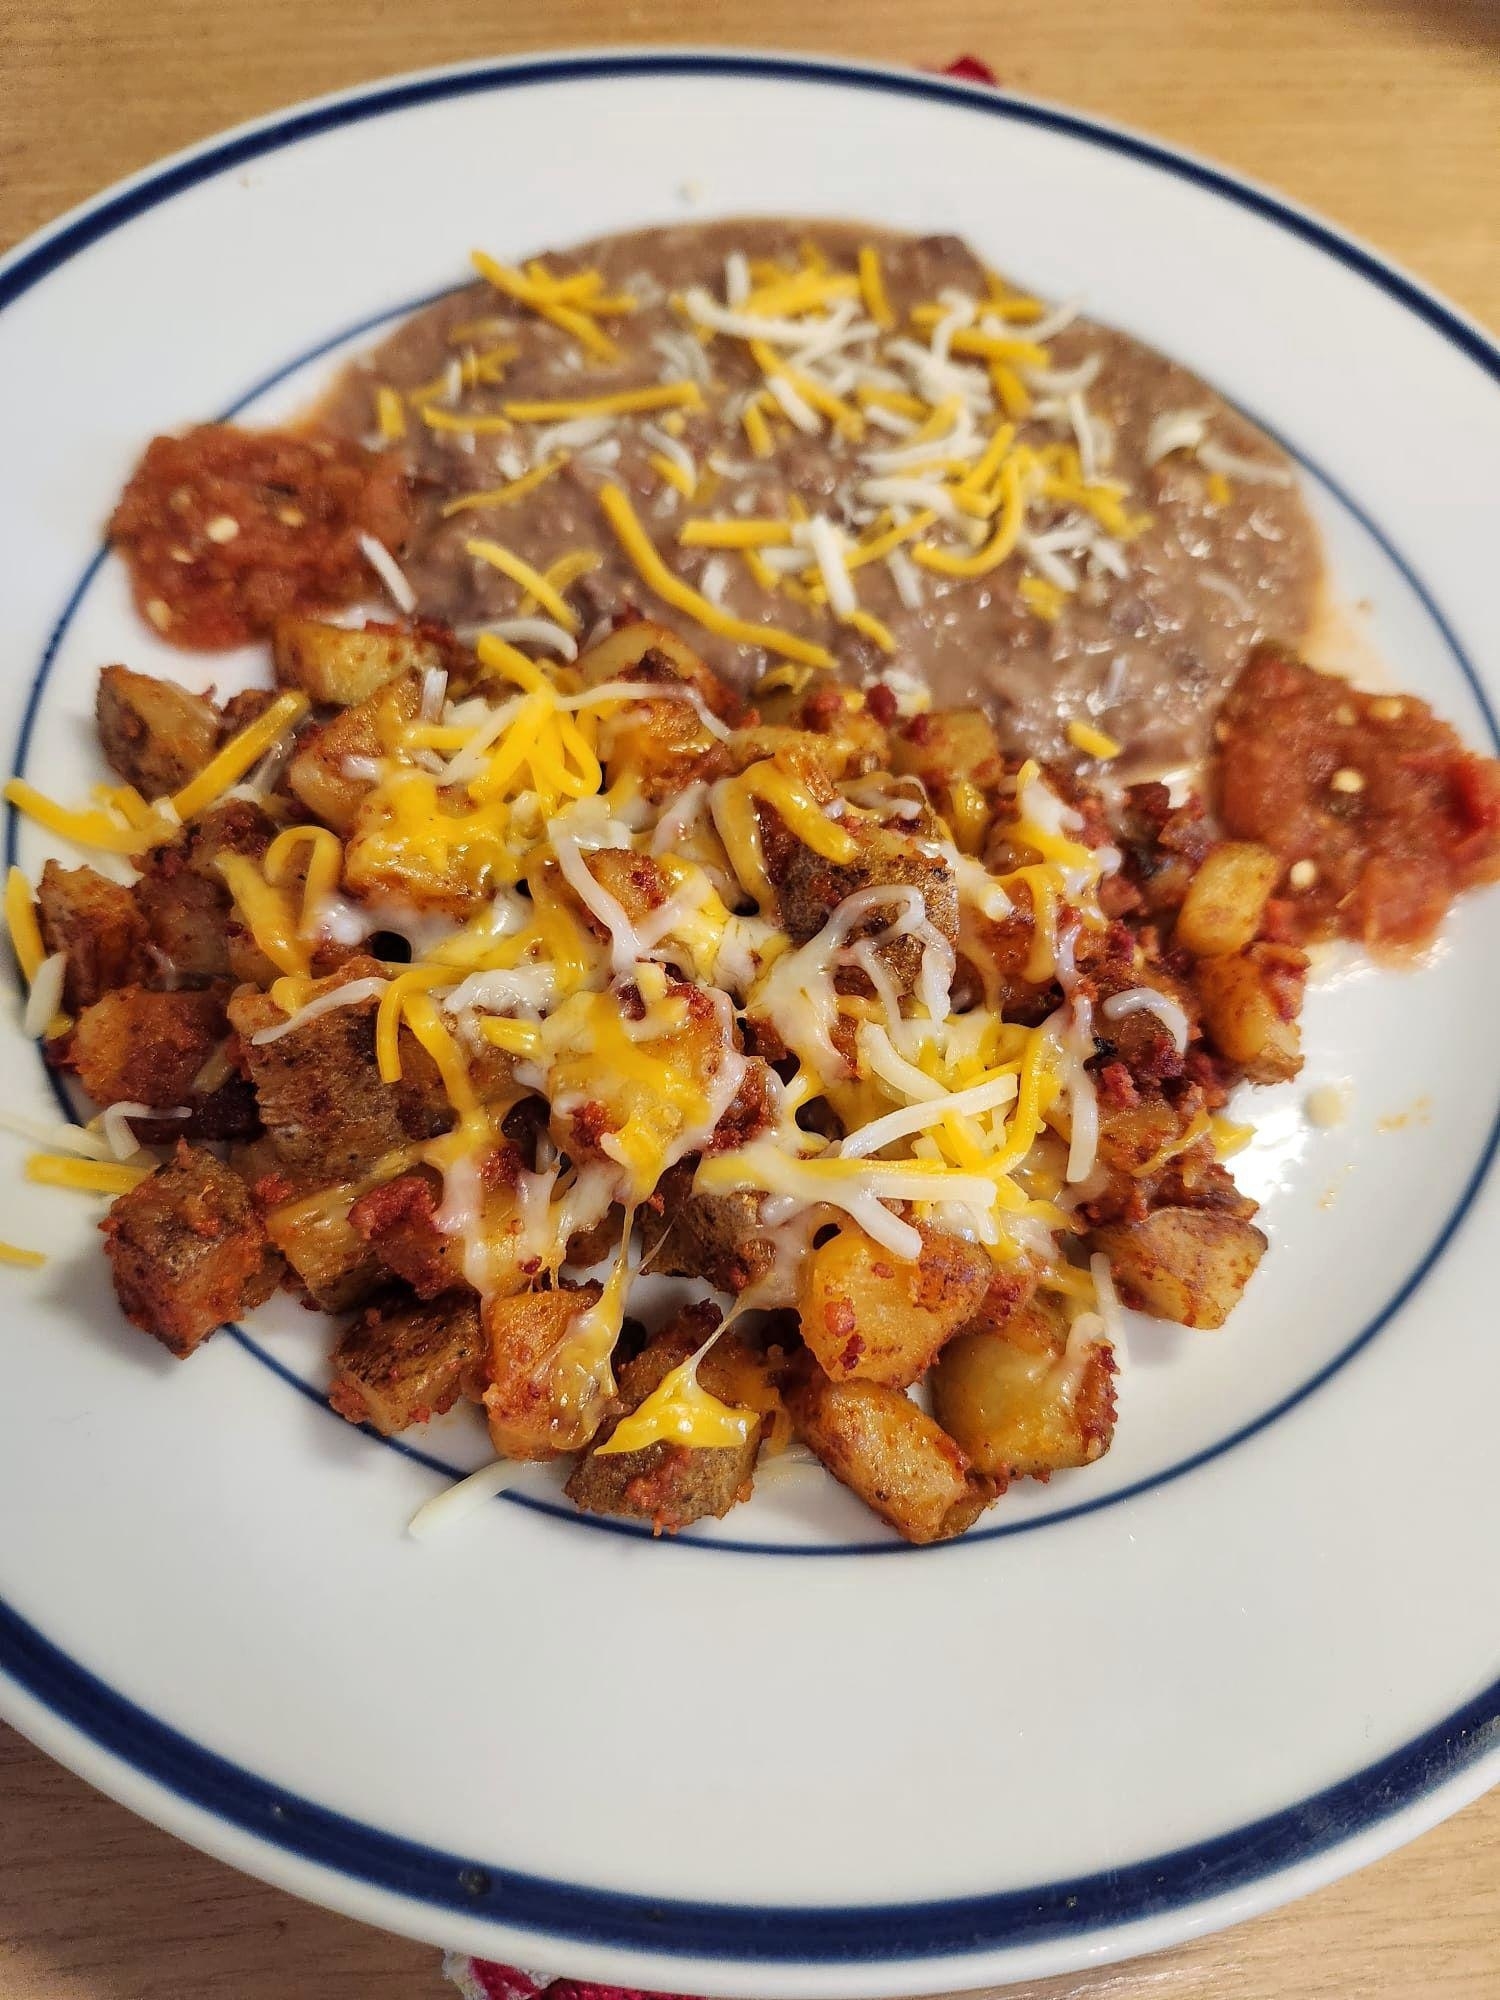 A plate of breakfast with hash browns, cheese, and beans